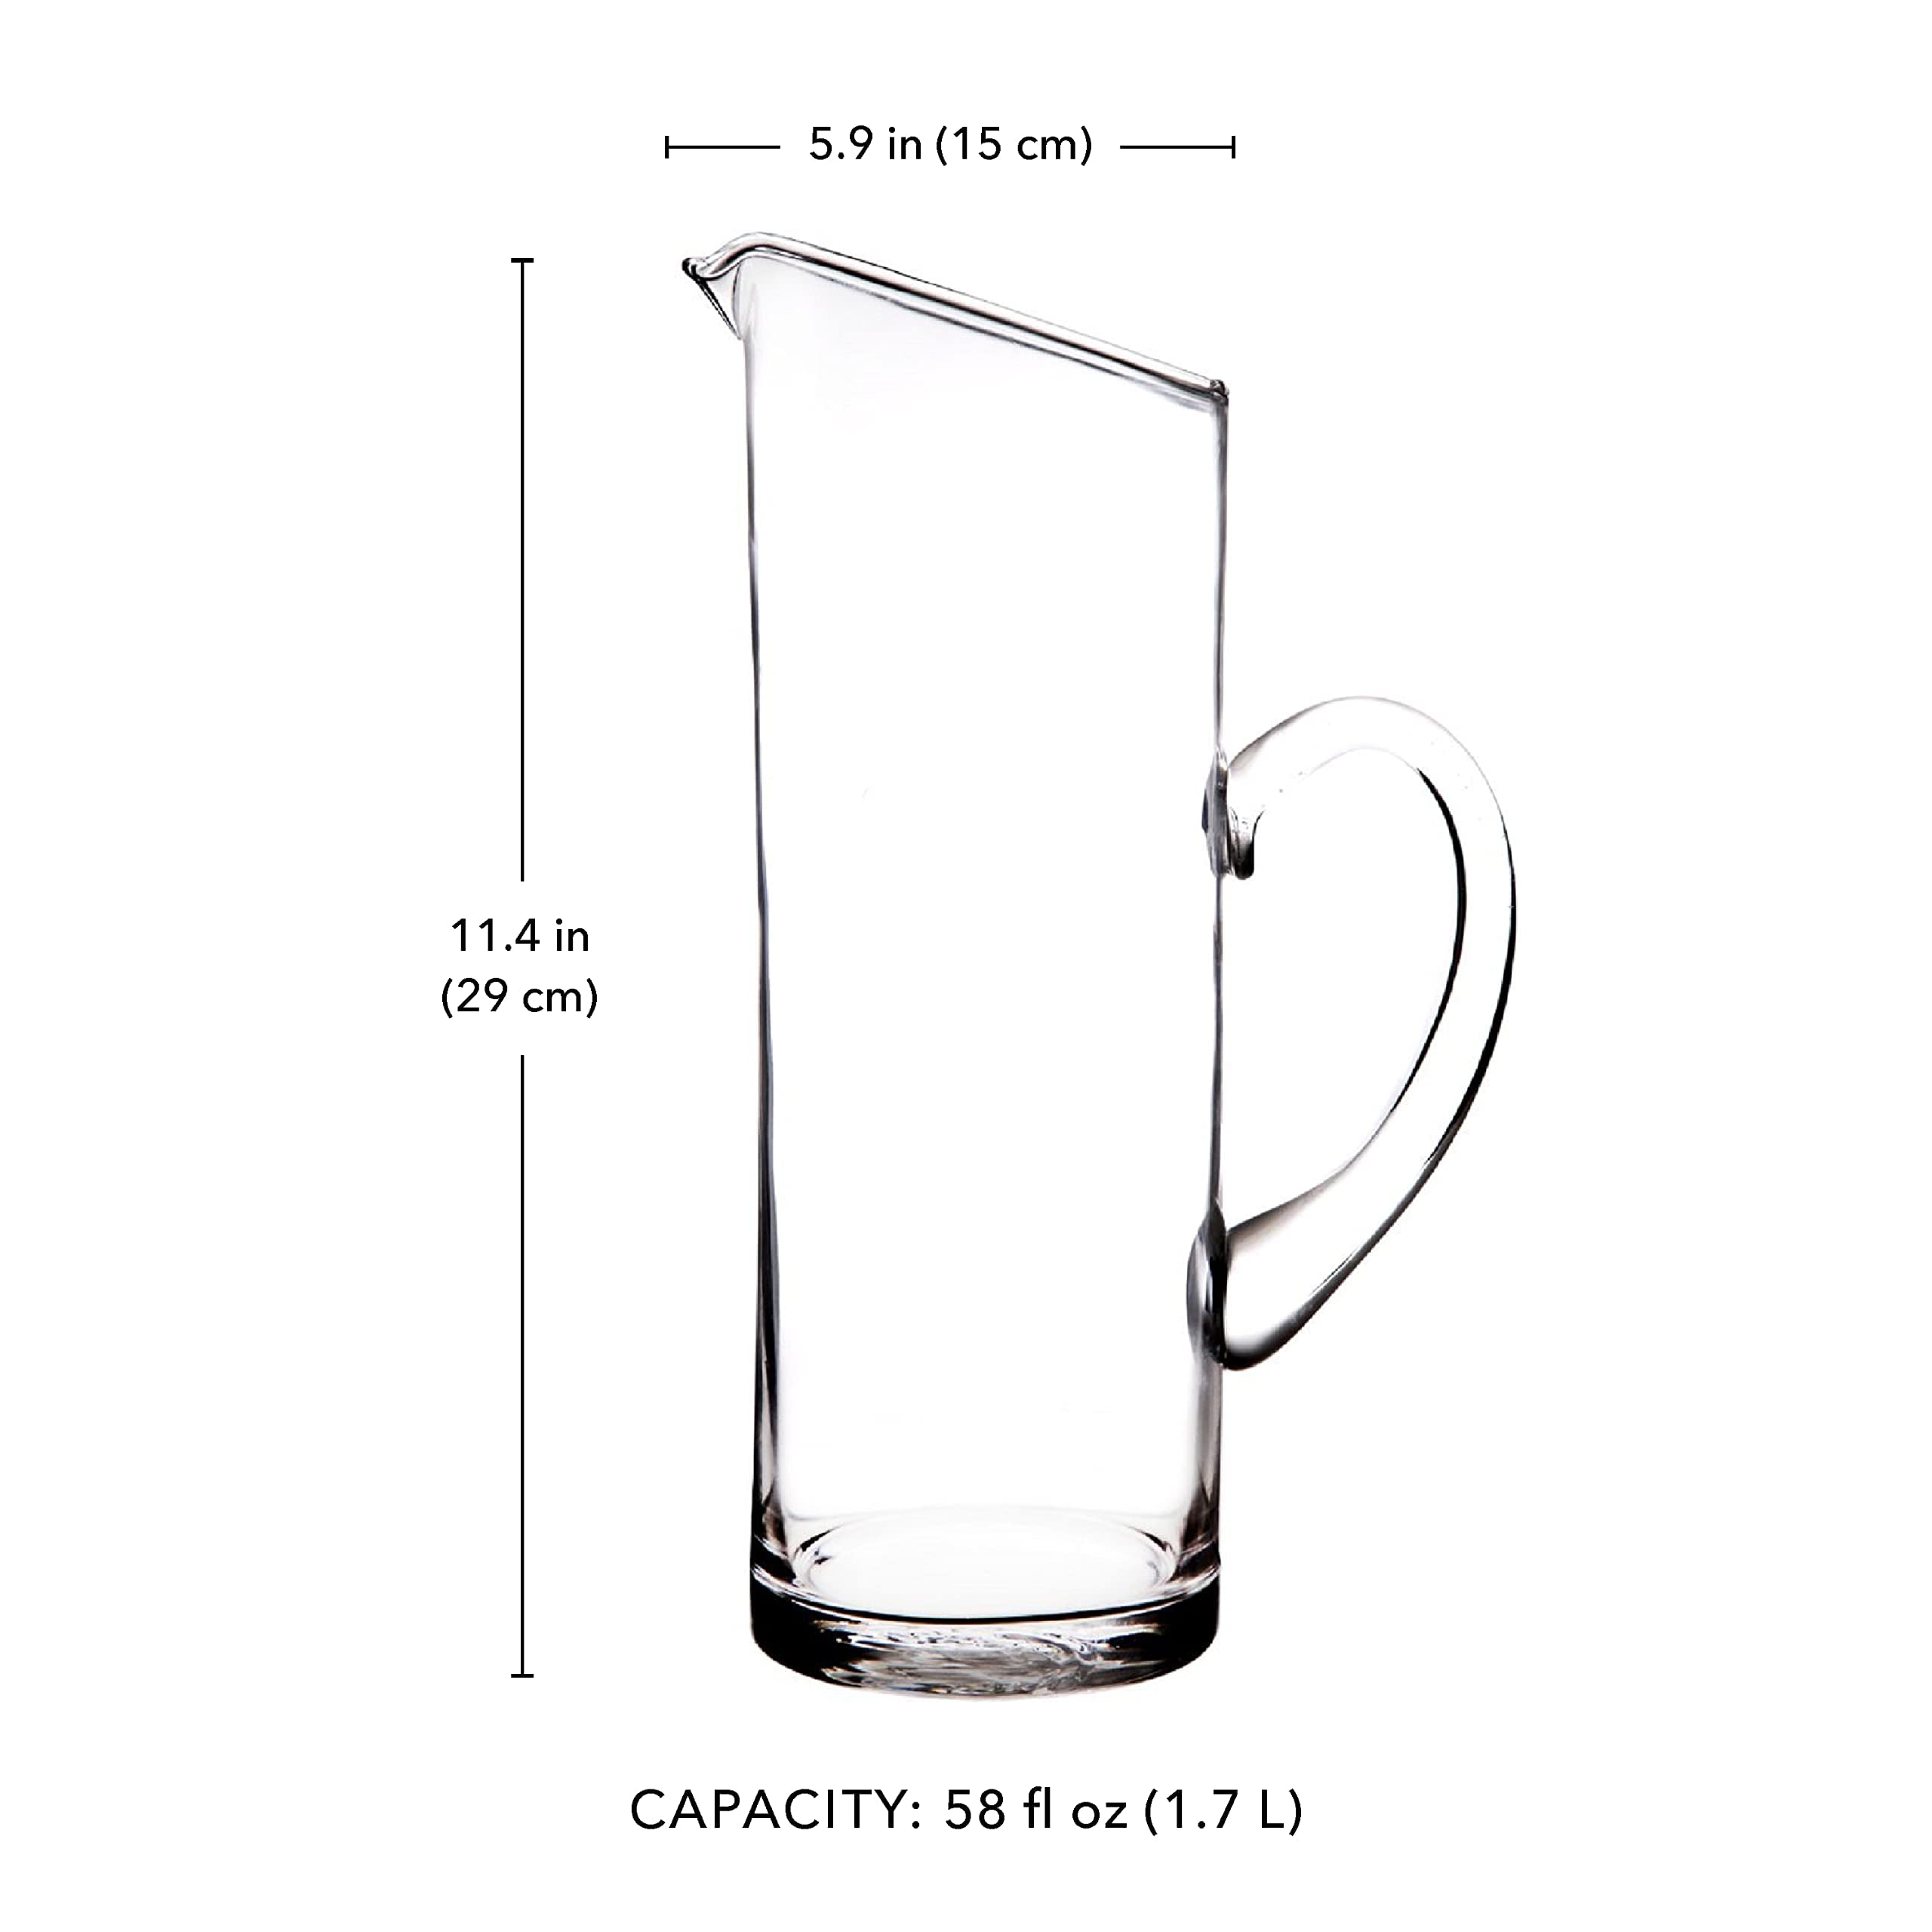 Glass Water Pitcher with Spout – Elegant Serving Carafe for Water, Juice, Sangria, Lemonade, and Cocktails – Crystal-Clear Glass Beverage Pitcher.